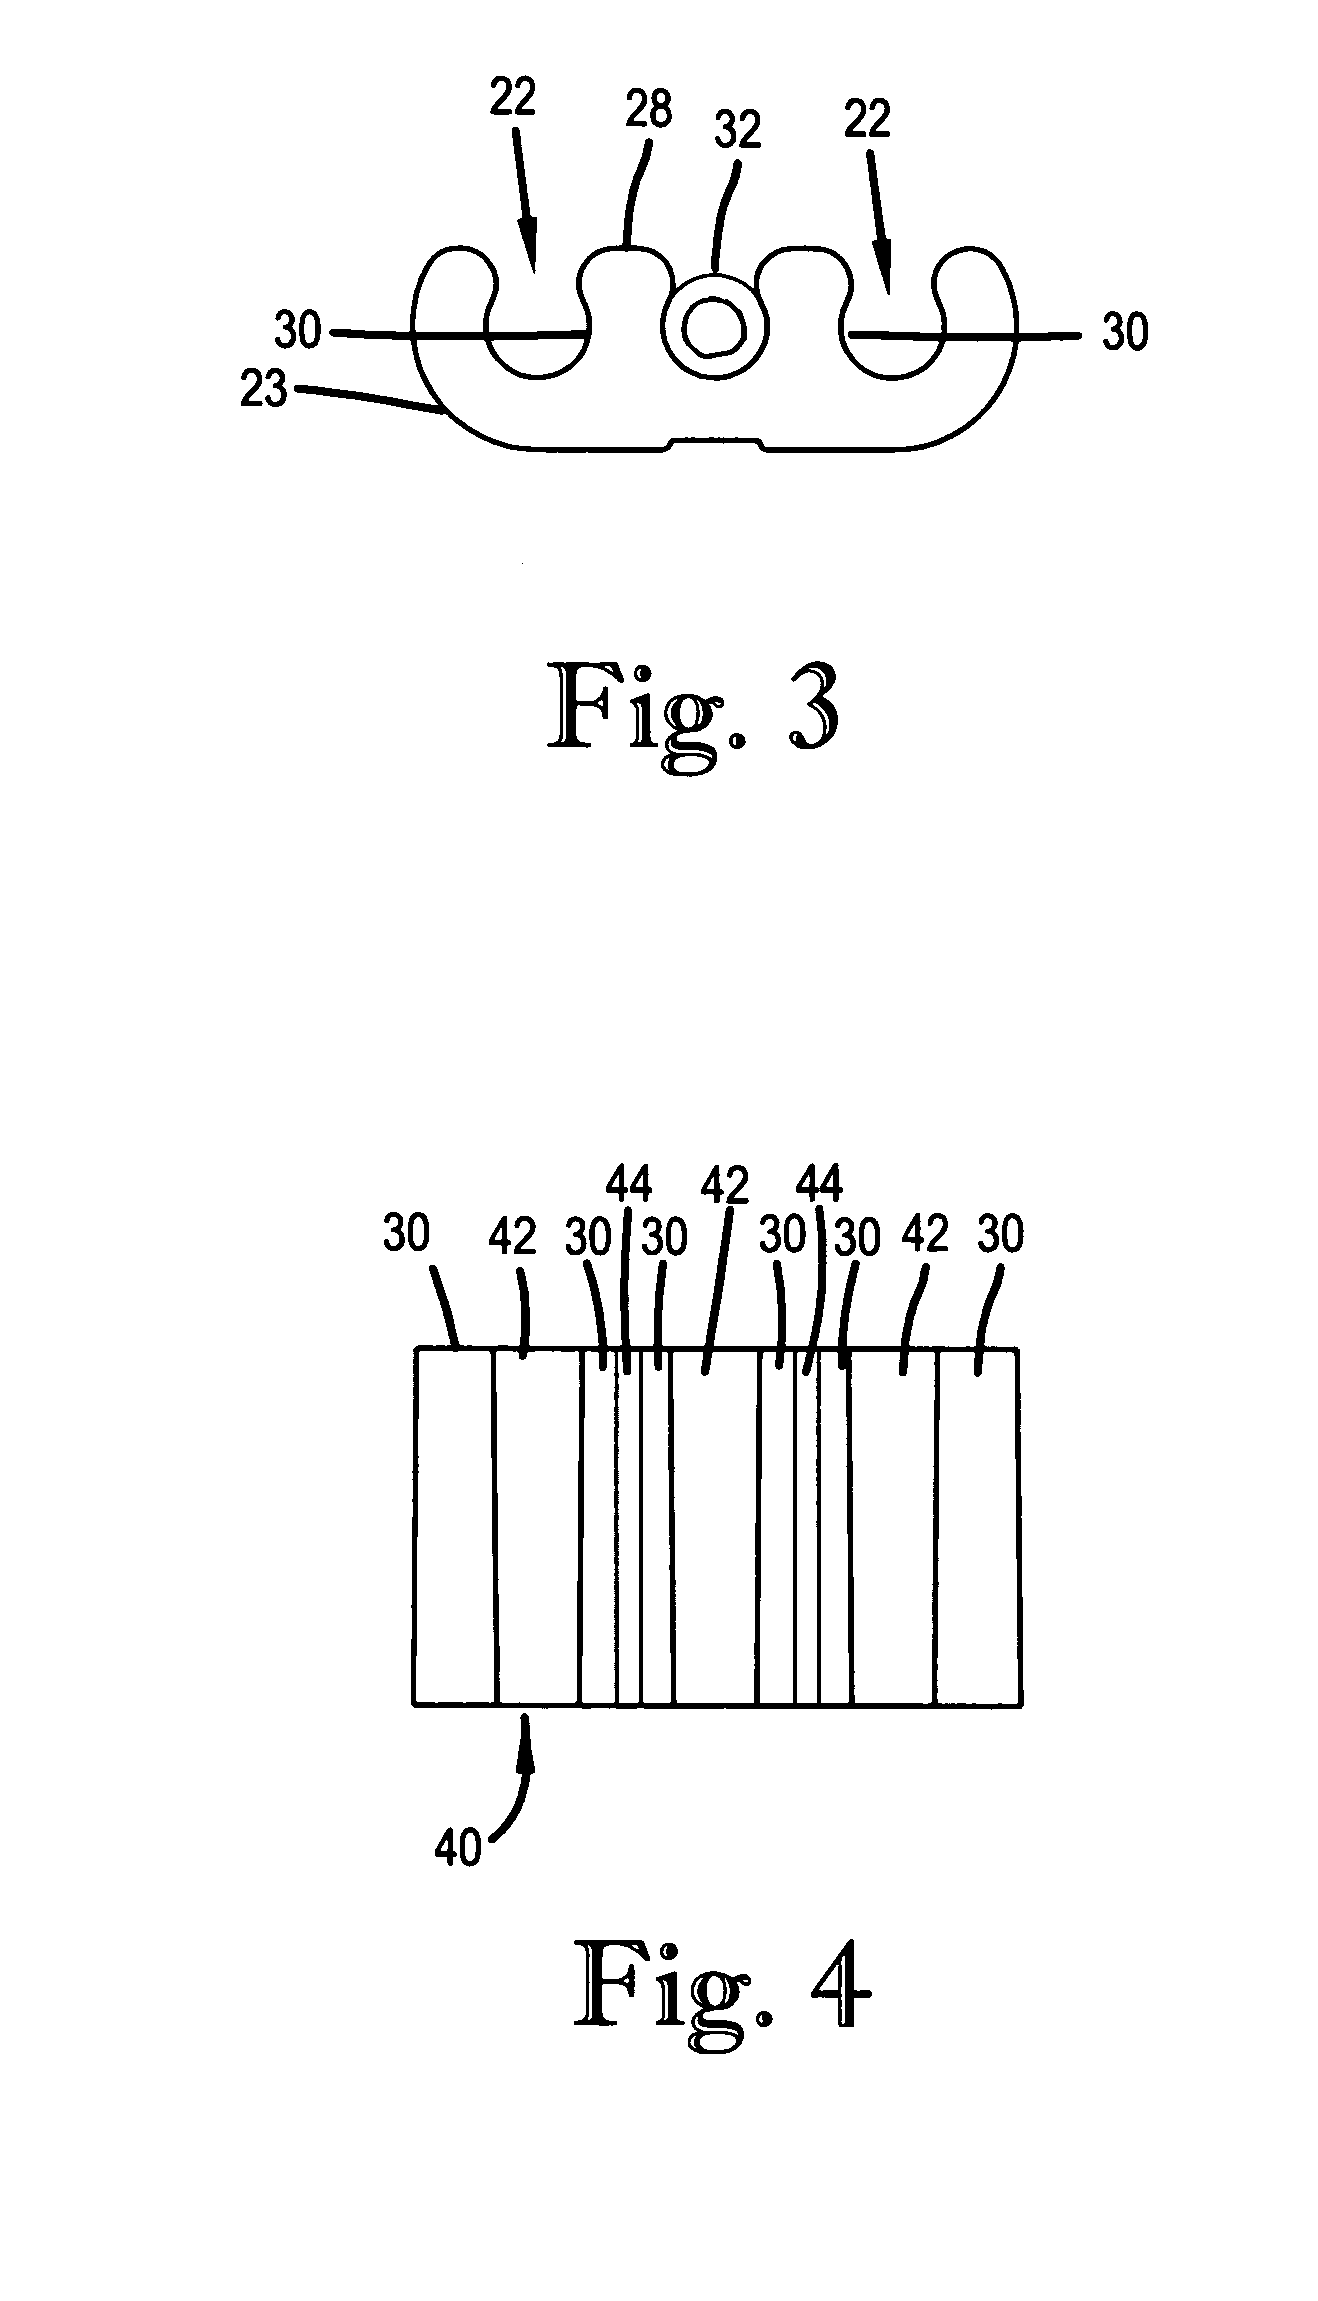 Site securement device for securing intravascular tubing